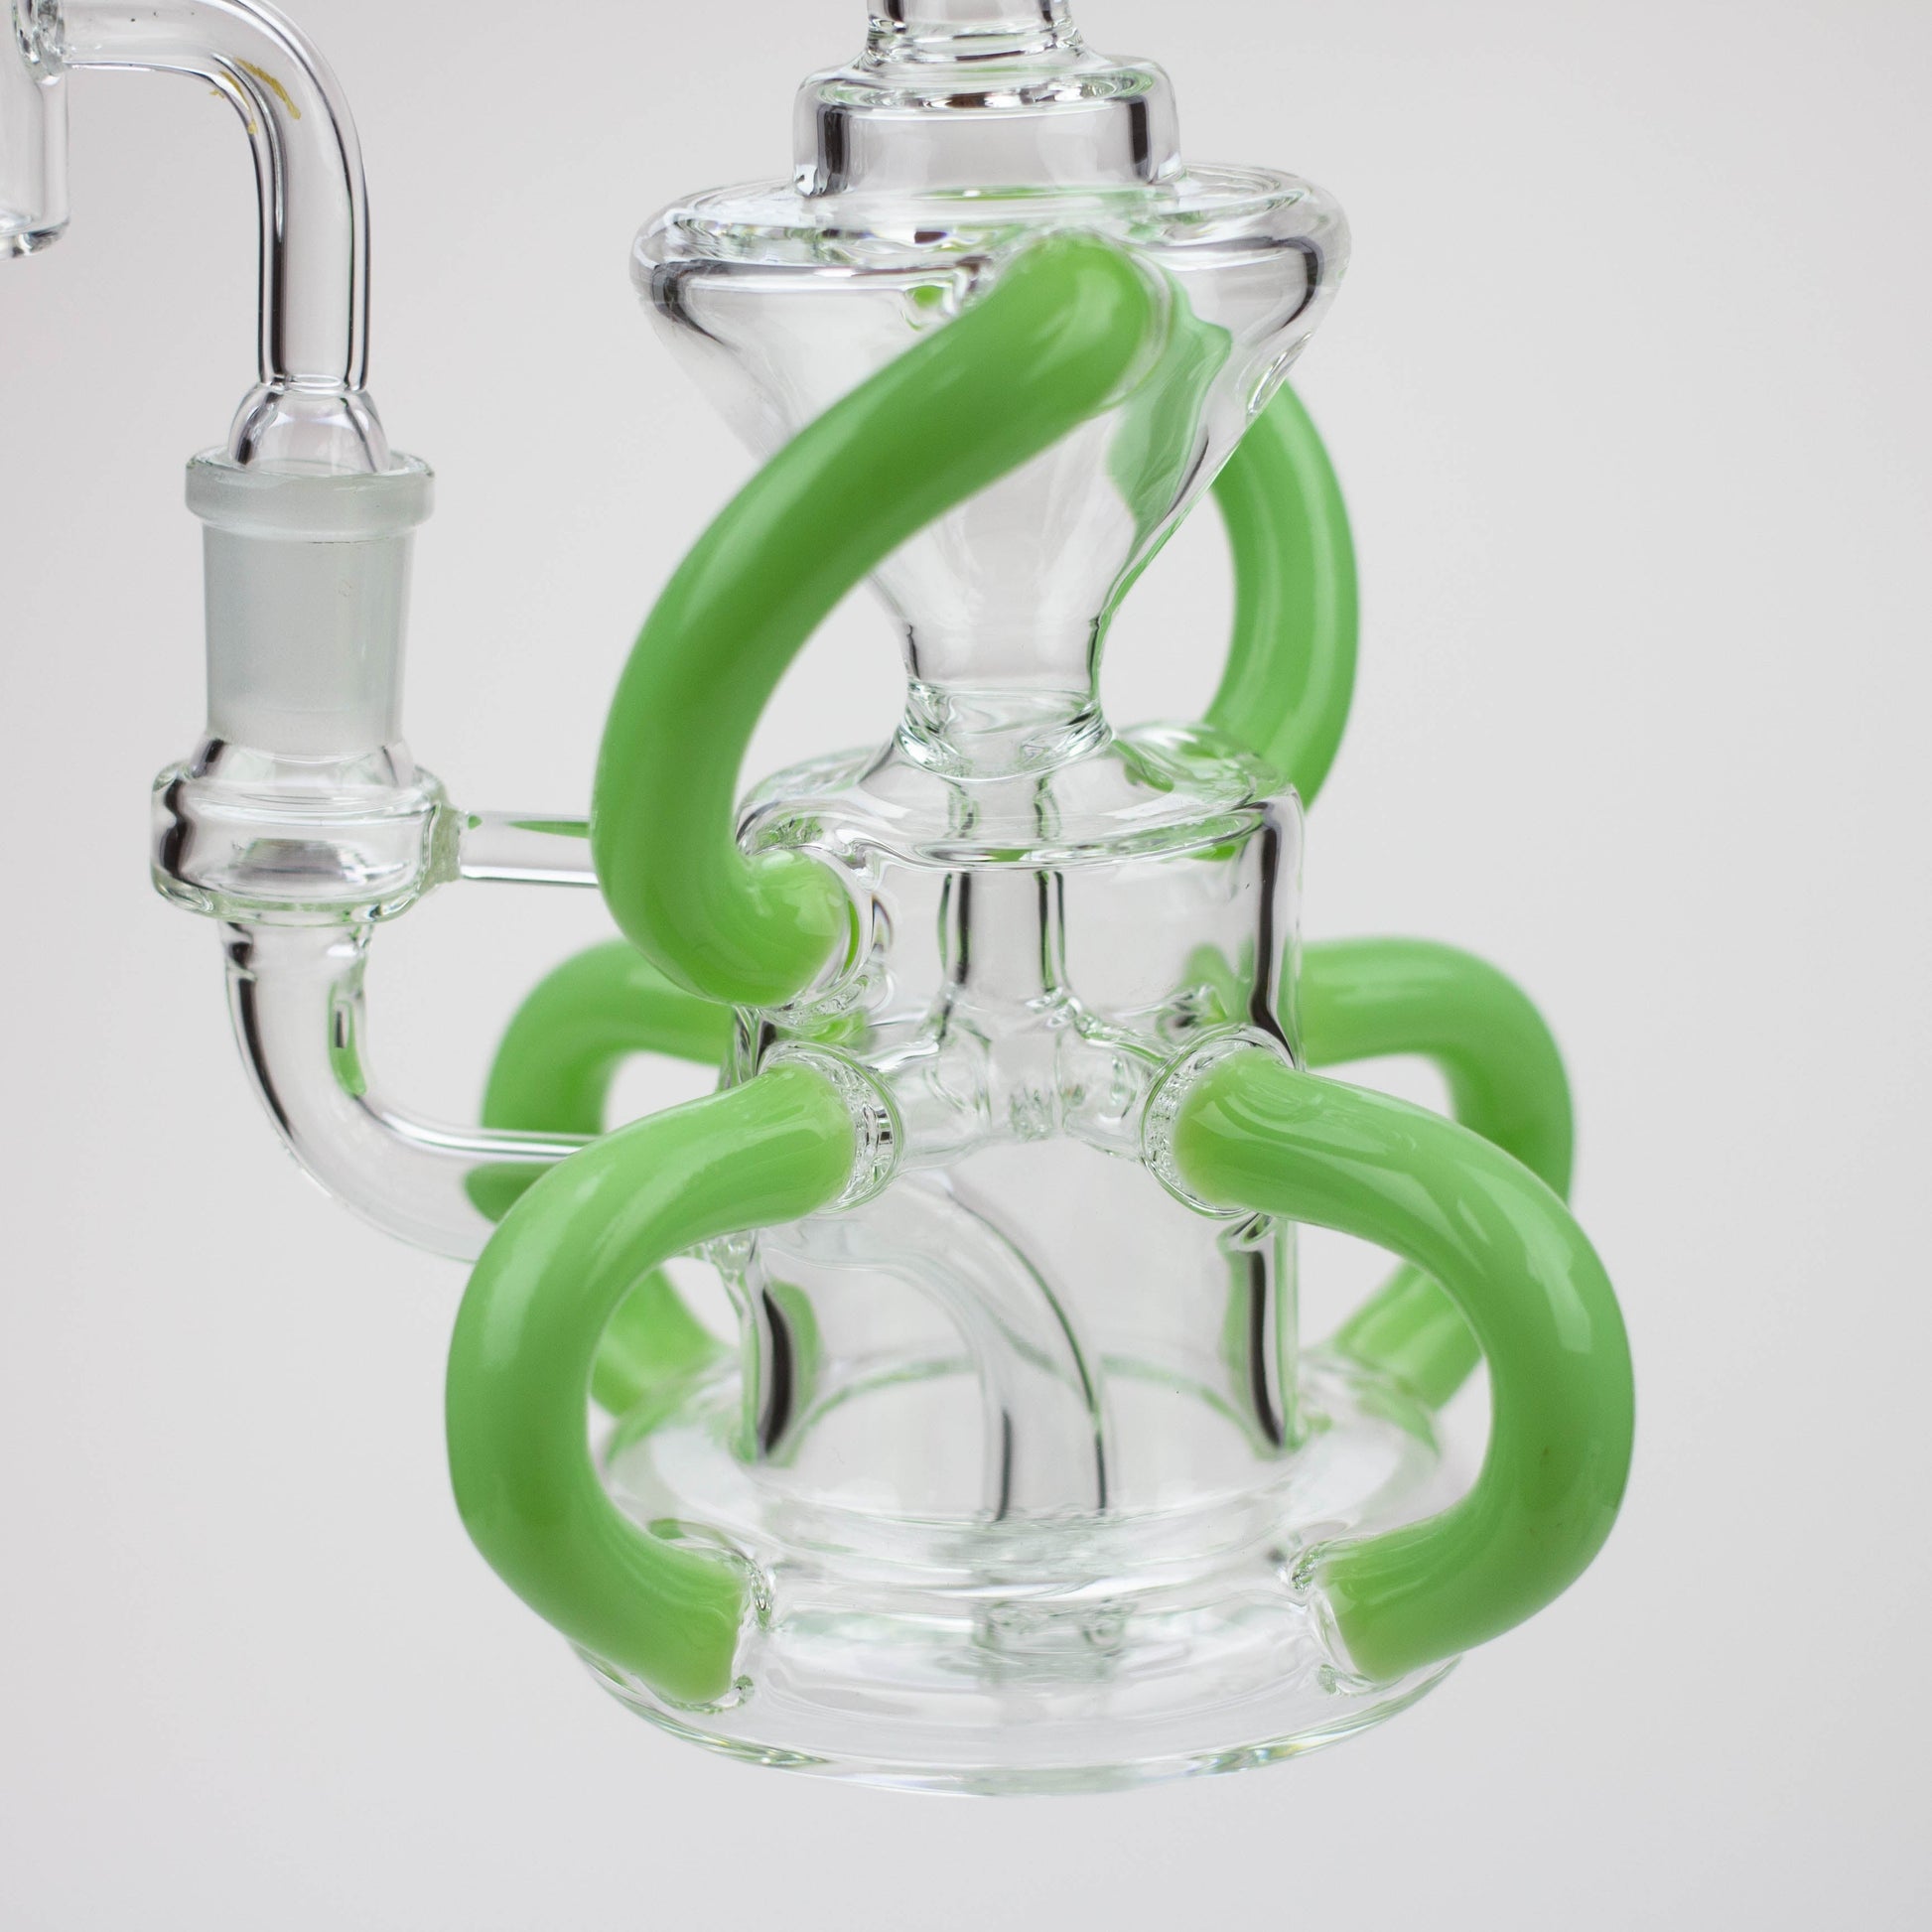 preemo - 8 inch 6-Arm Recycler Rig [P032]_10